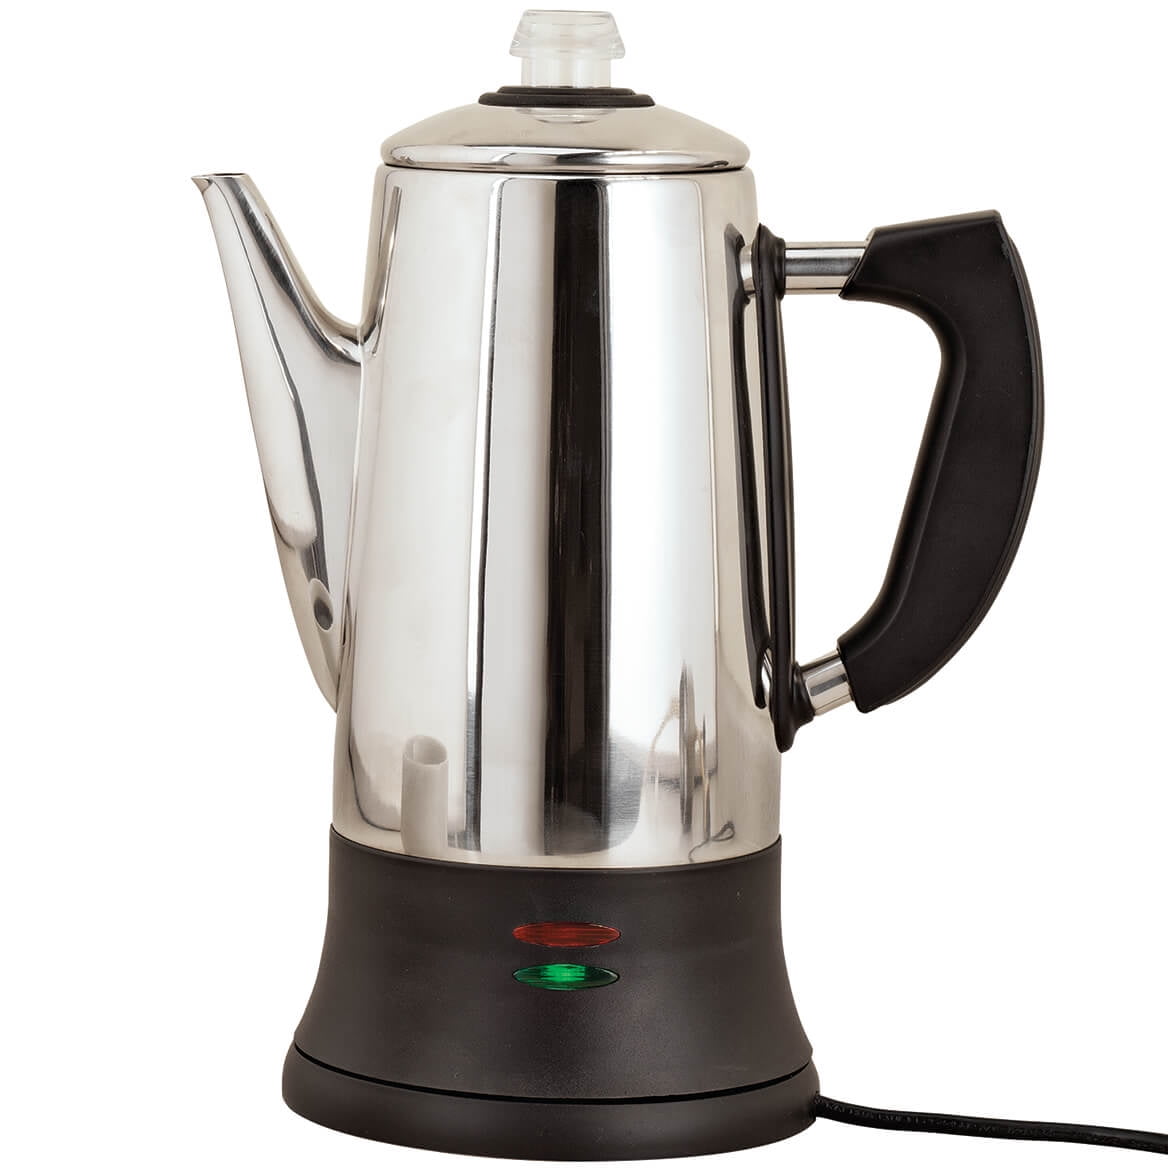 Coffee Percolators for sale in Winsted, Connecticut, Facebook Marketplace